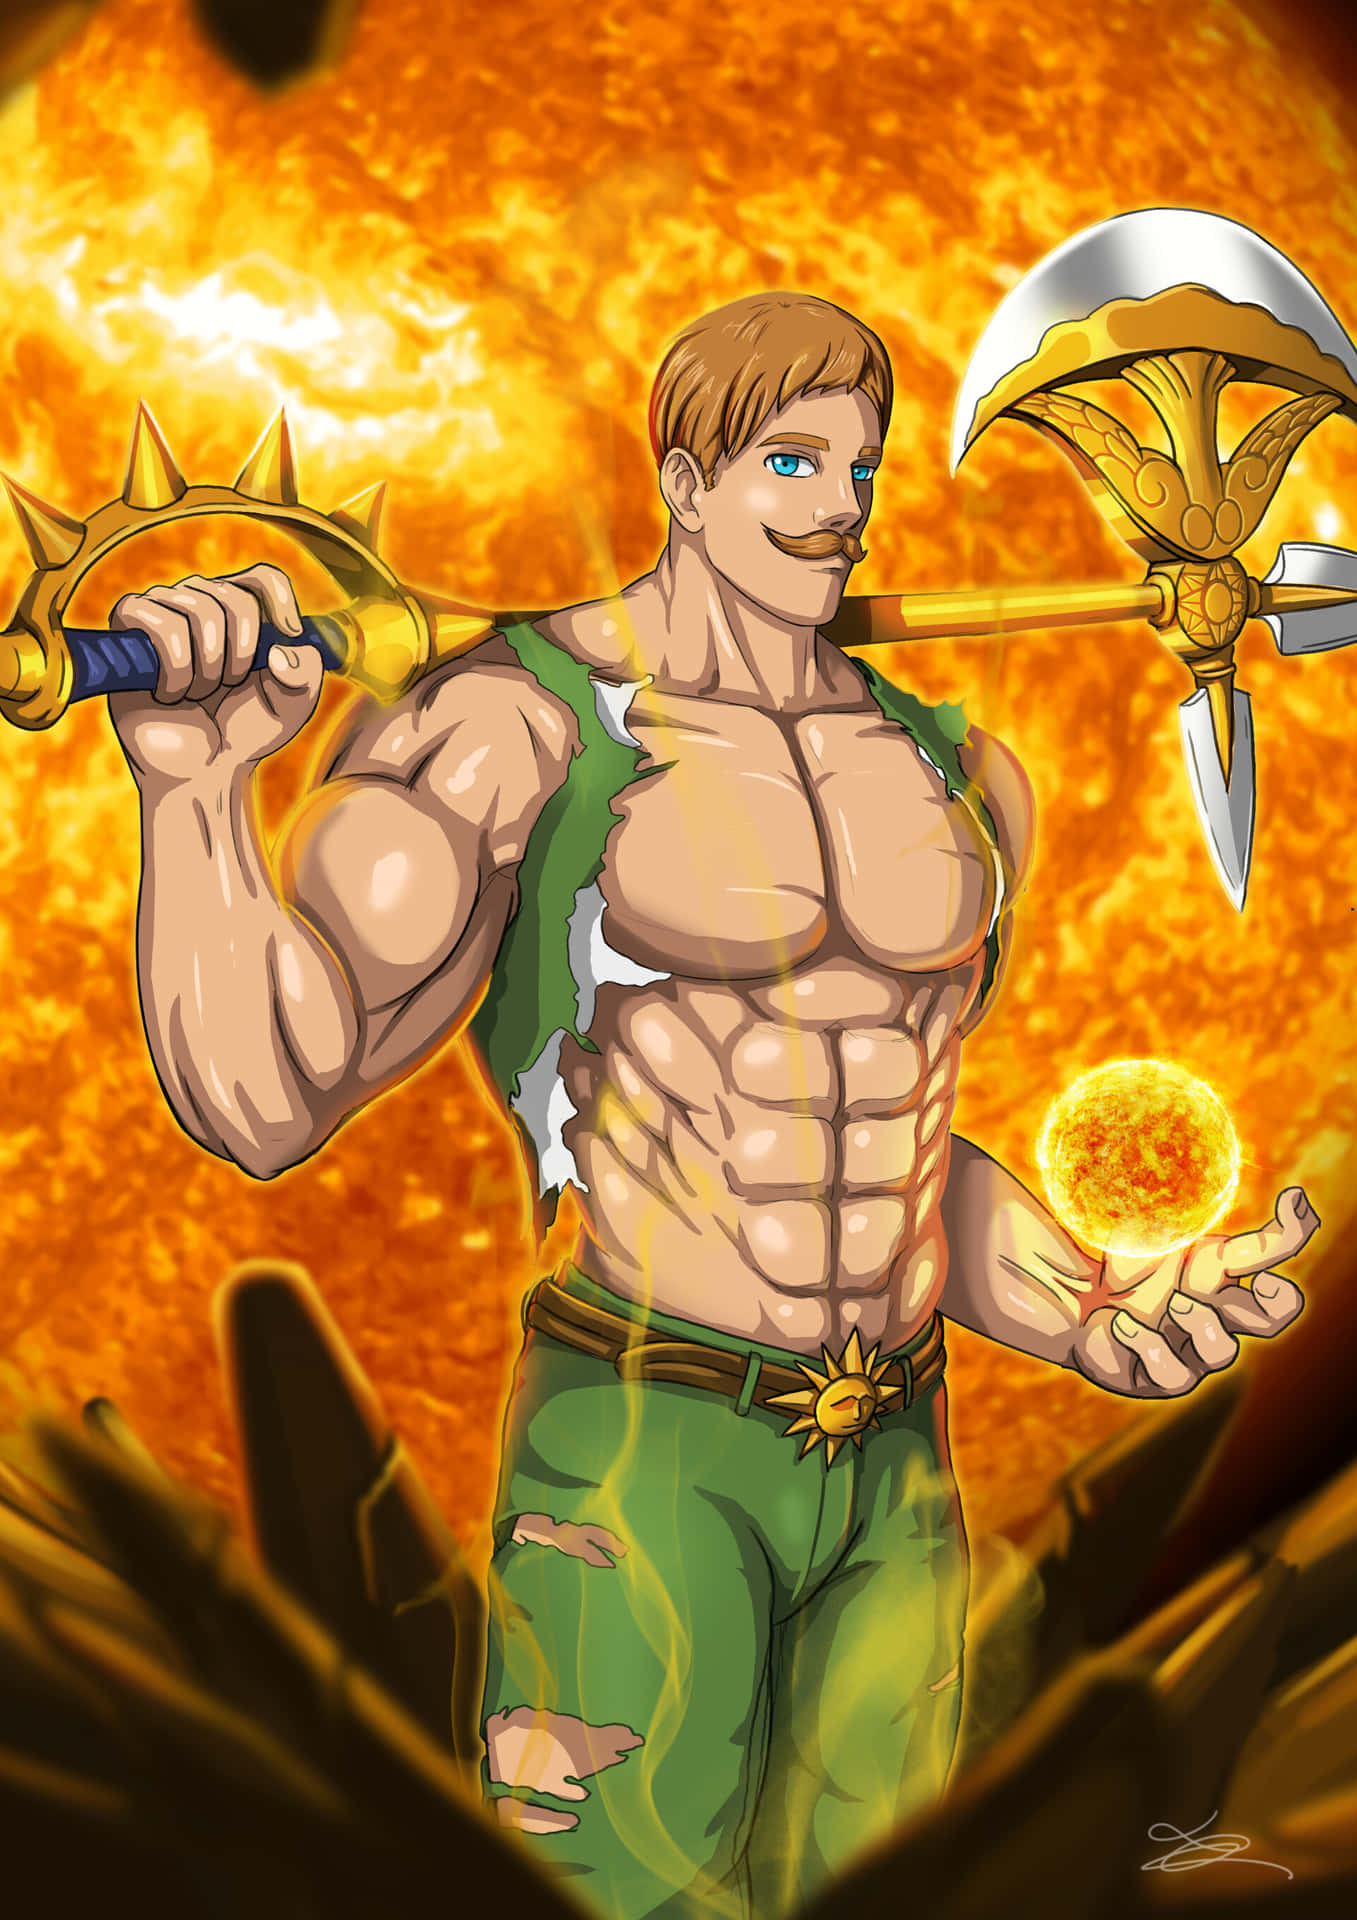 Escanor, The One with Unparalleled Strength